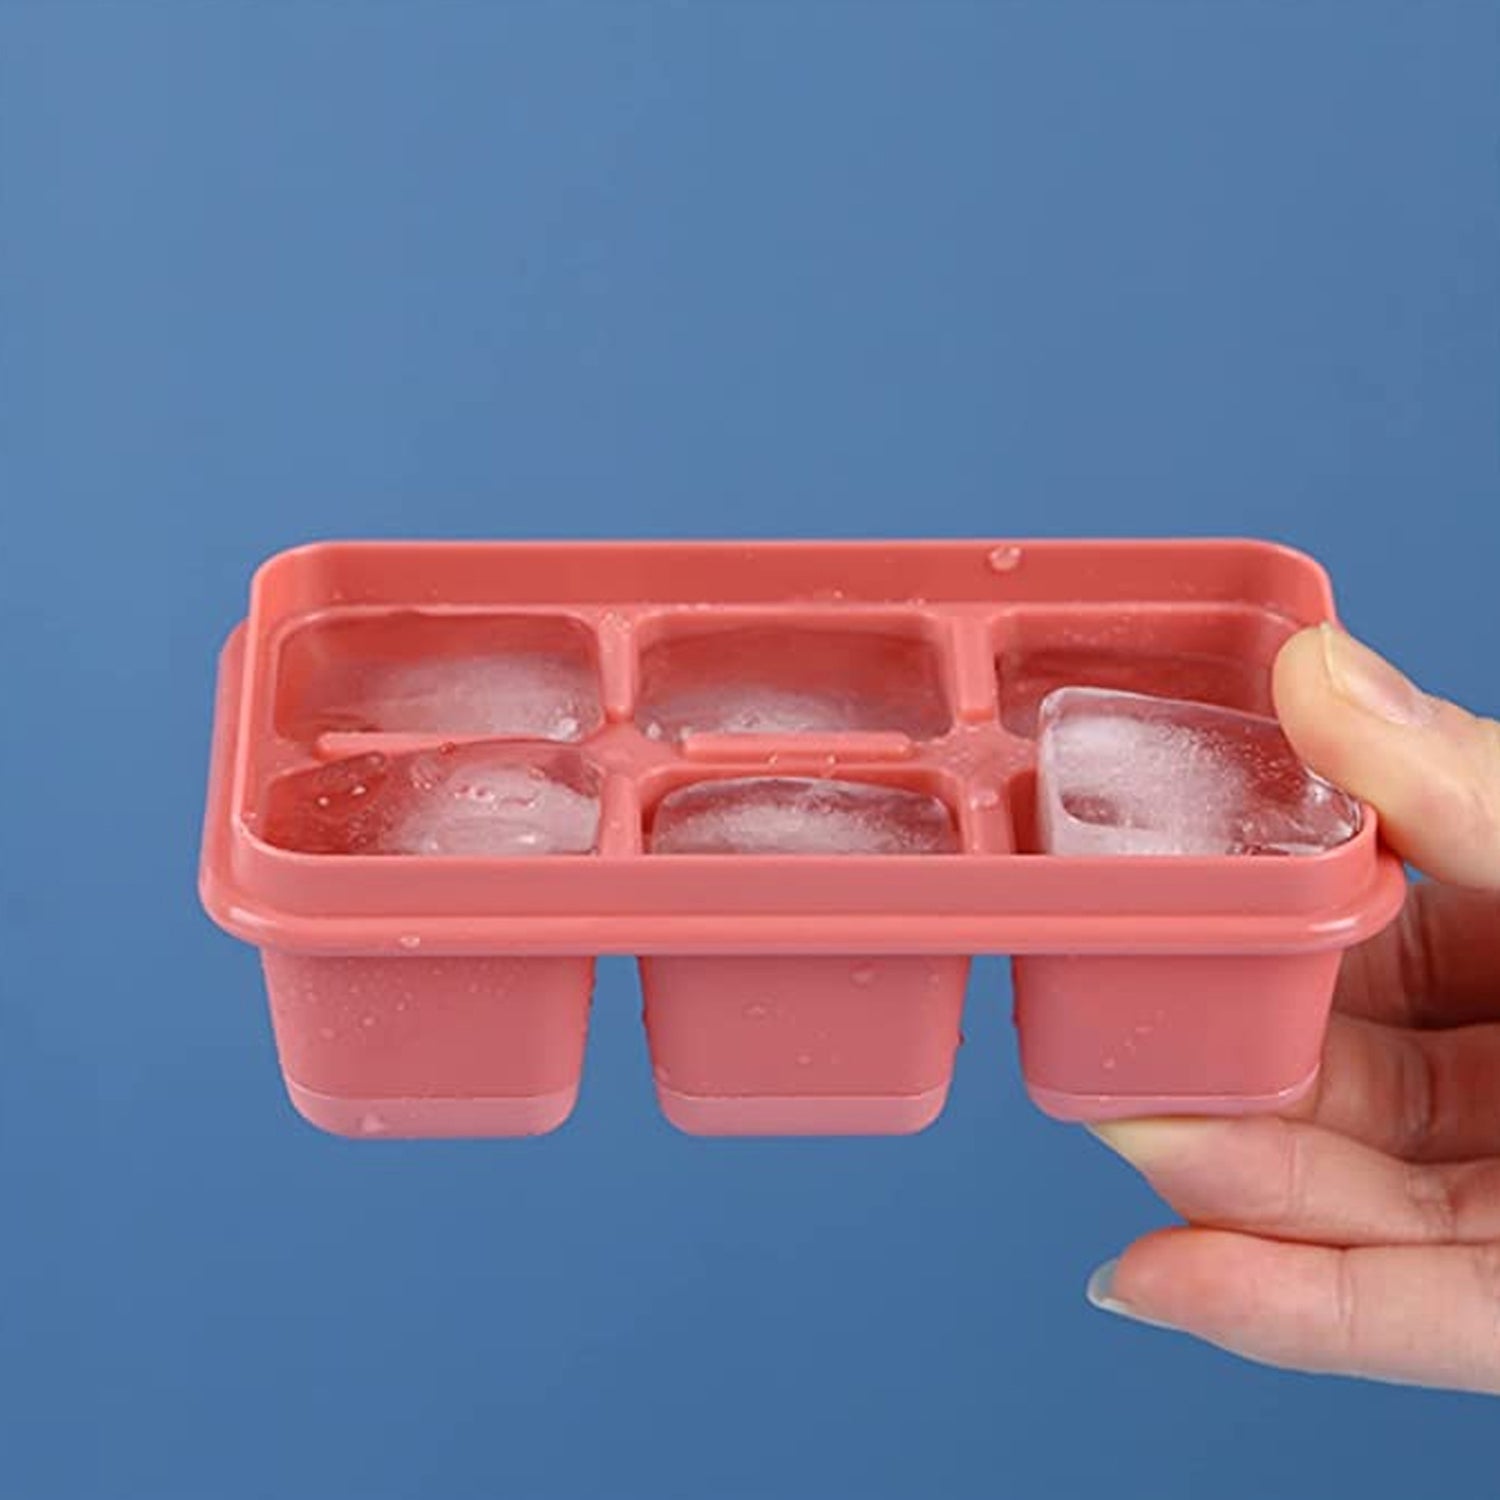 4750 6 cavity Silicone Ice Tray used in all kinds of places like household kitchens for making ice from water and various things and all.